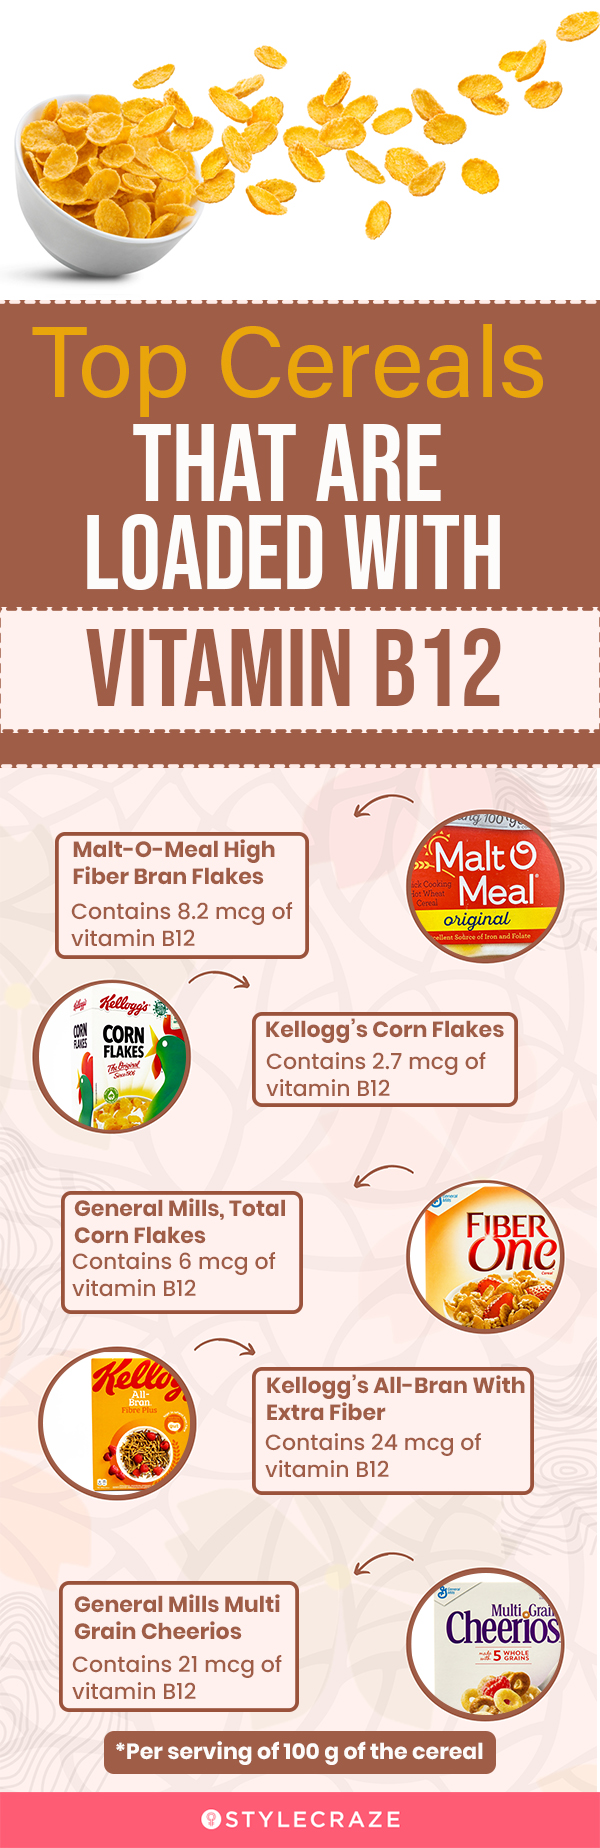 top cereals that are loaded with vitamin b12 [infographic]